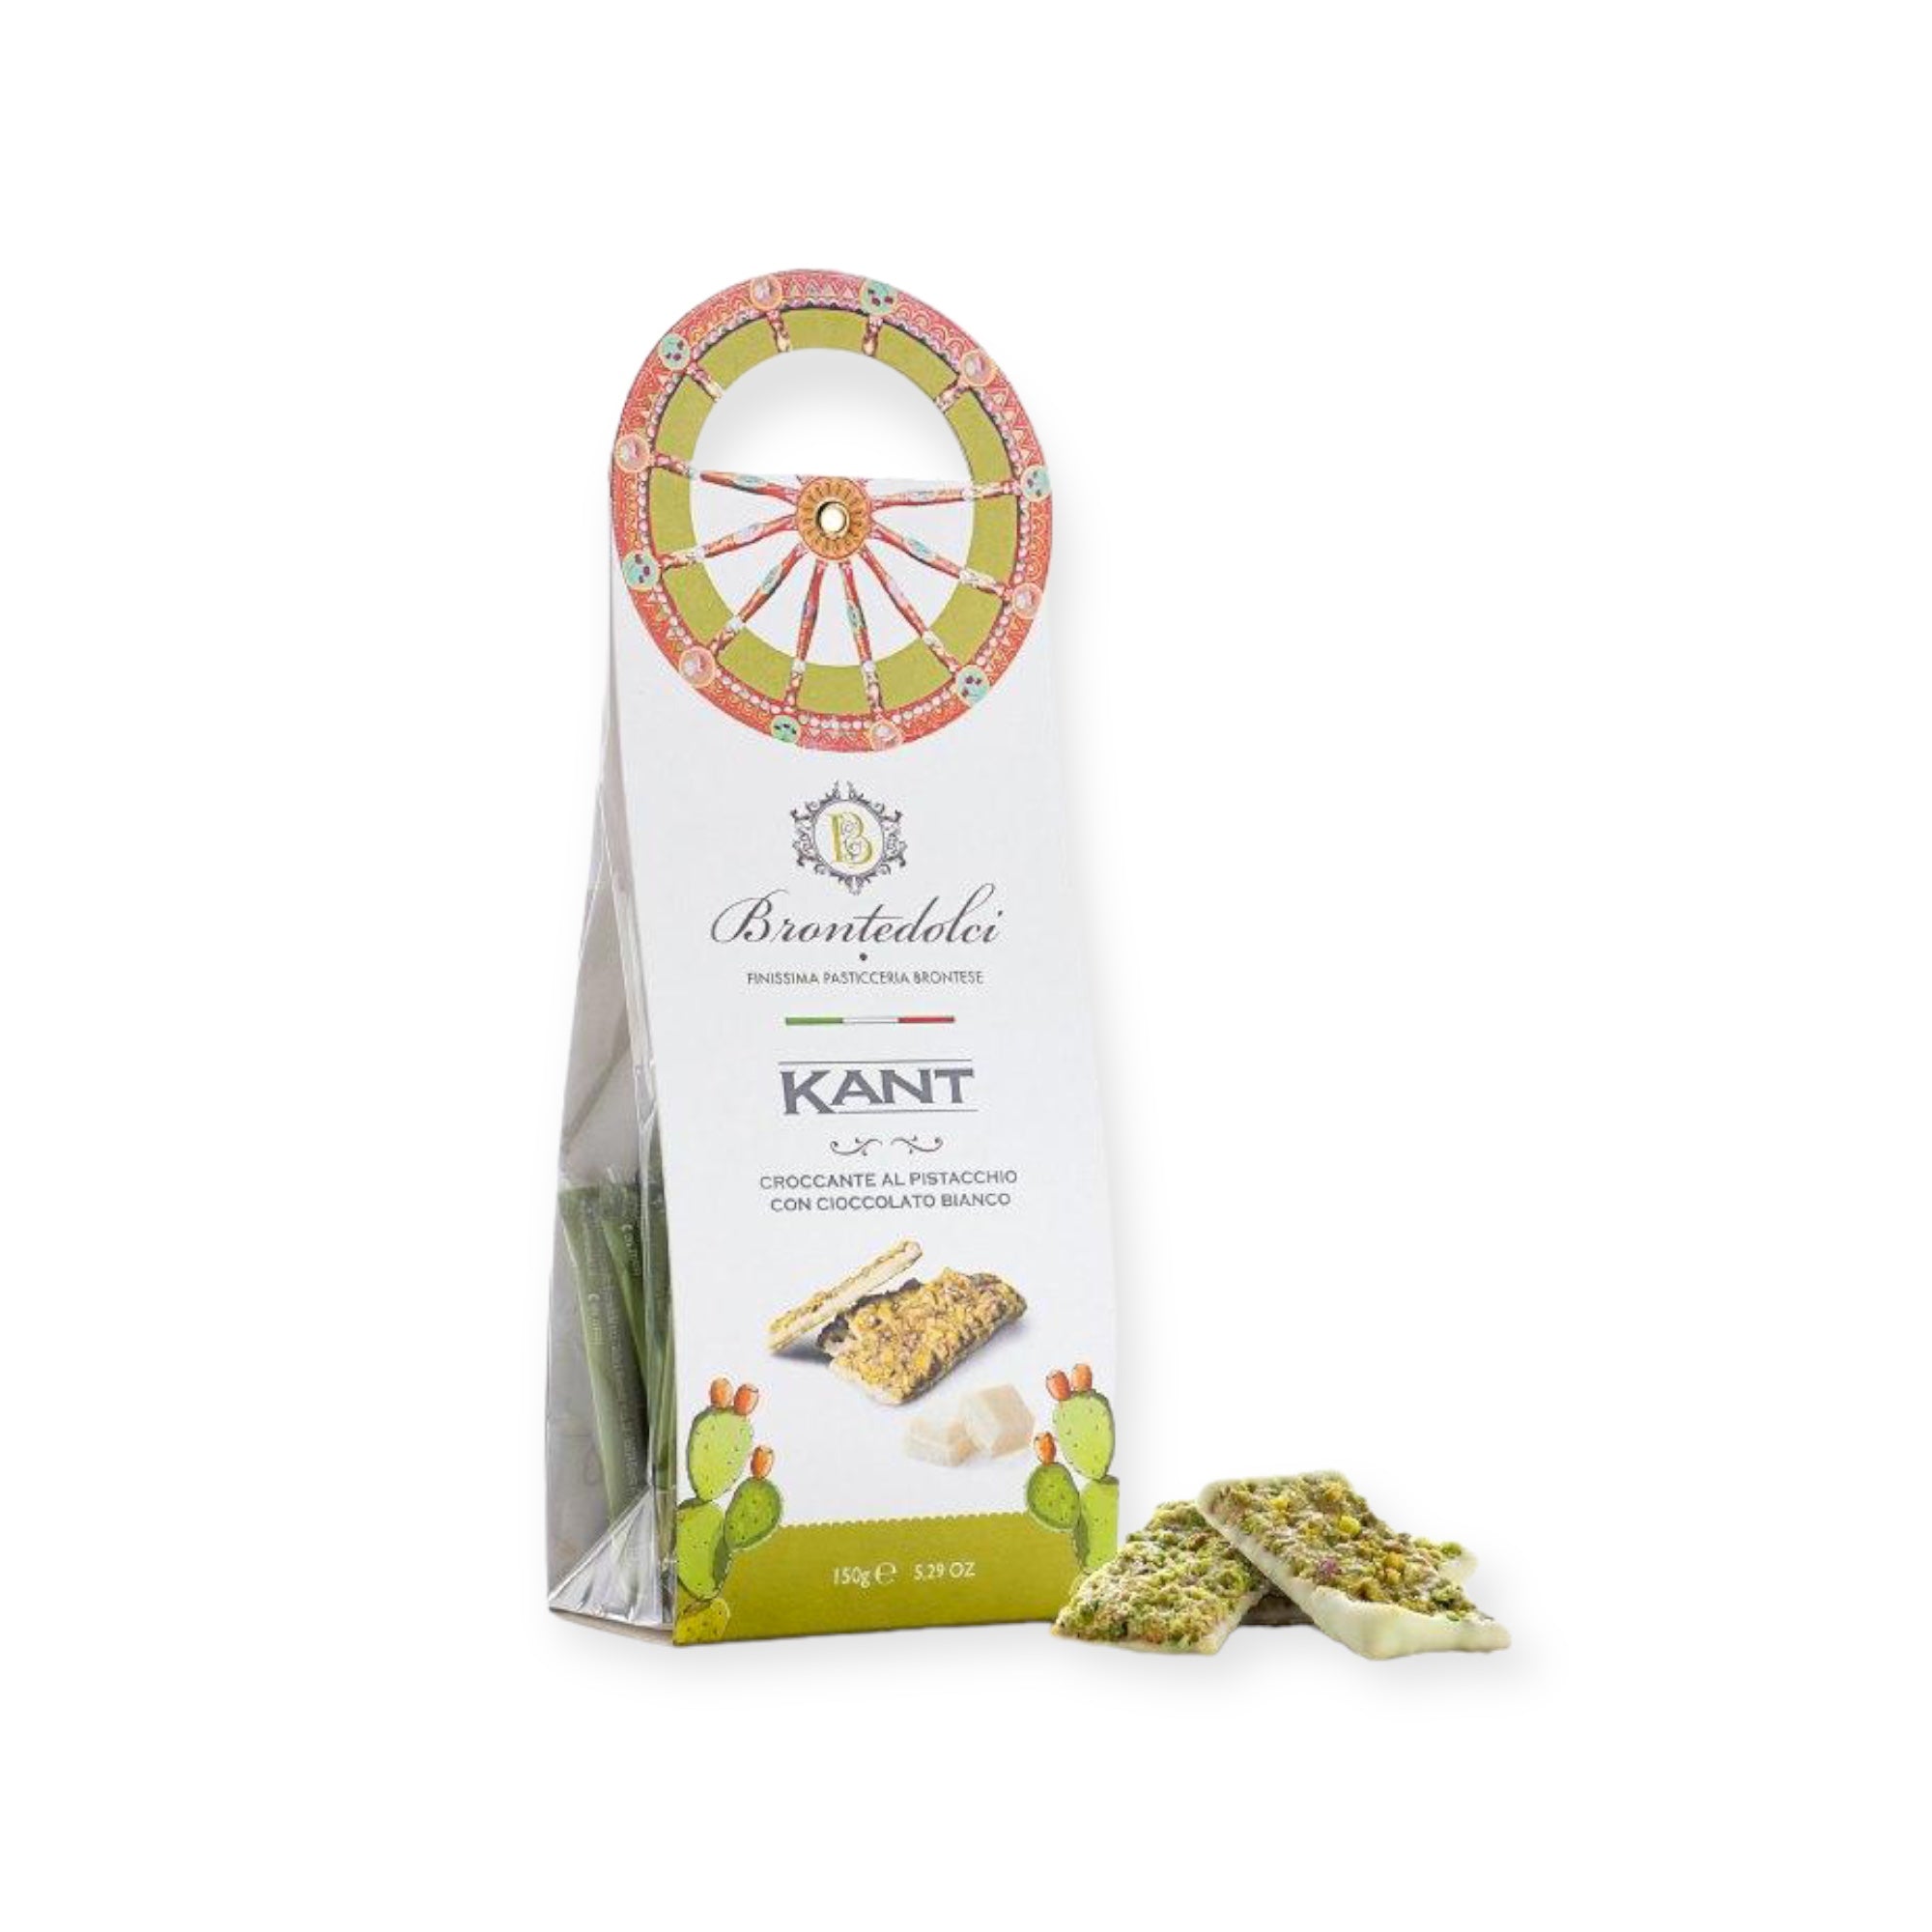 Brontedolci Kant Croccante Pistachio With White Chocolate 150g